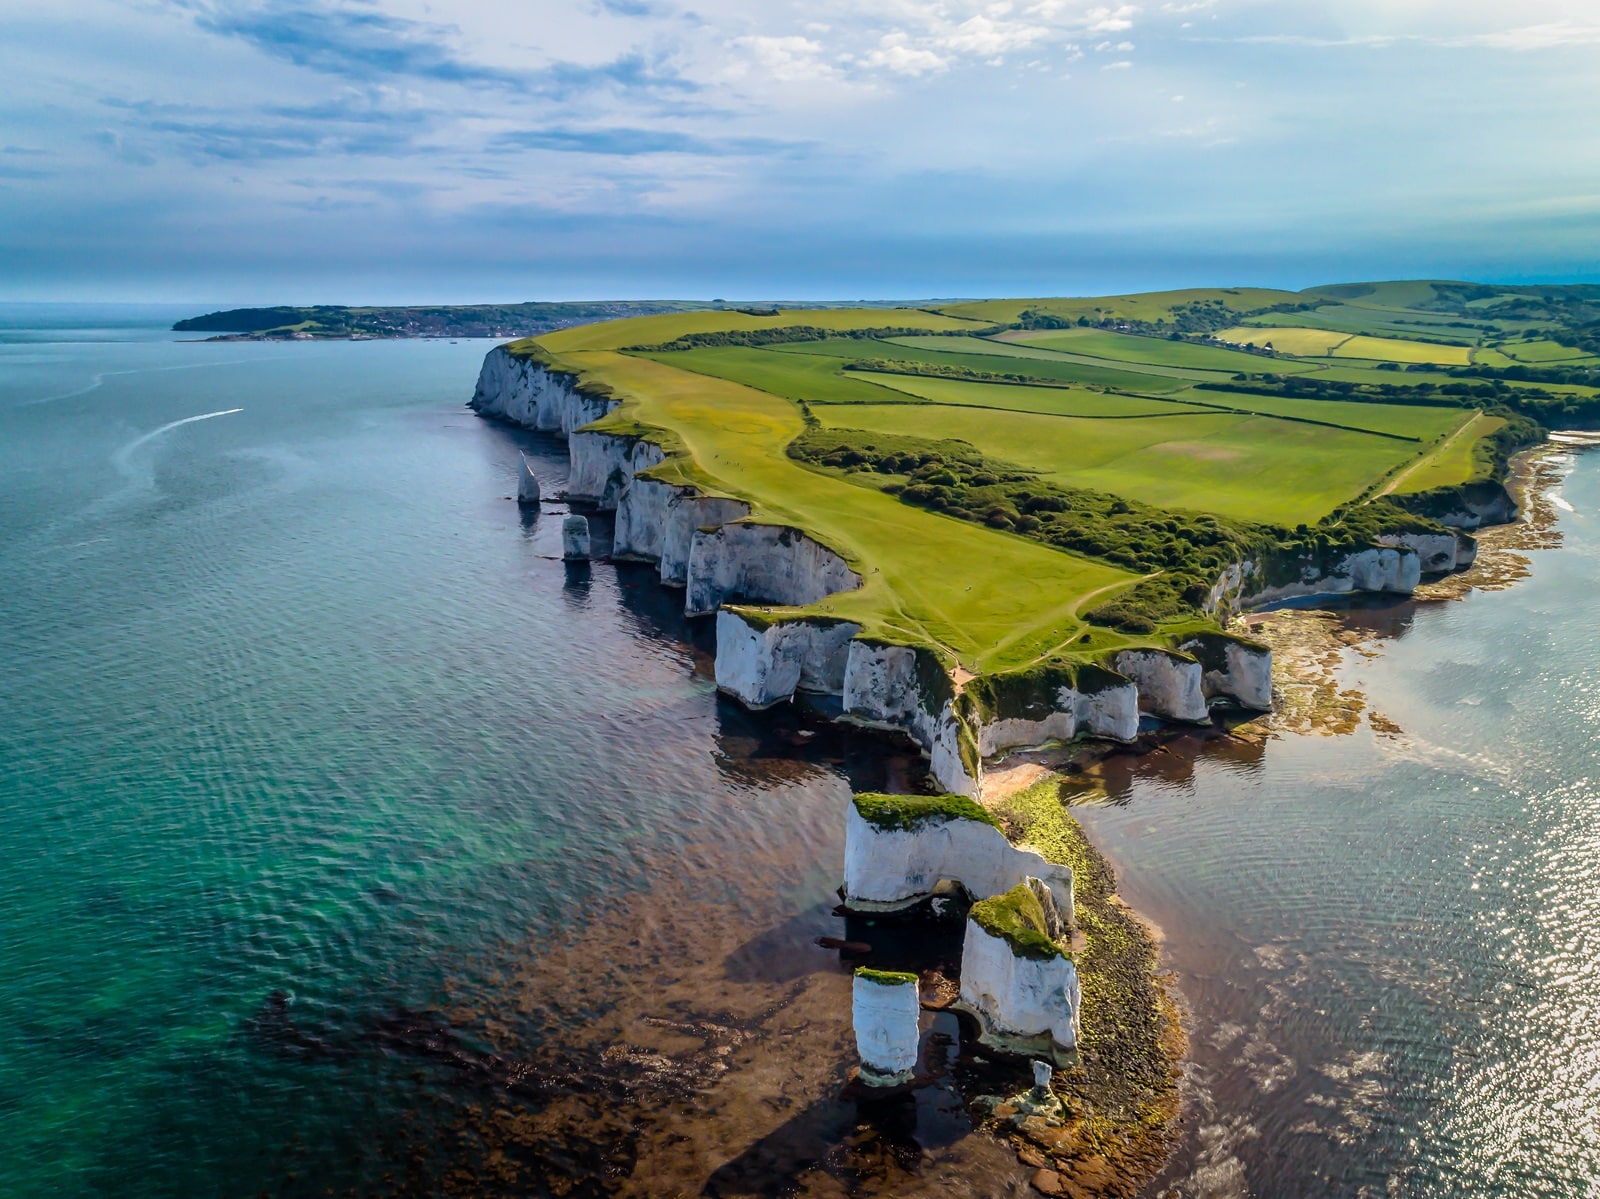 Image Credit: Shutterstock / Andy Lyons <p>Dorset’s dramatic coastline and rural retreats serve as a haven from the hustle and bustle, where safety is as solid as the Jurassic Coast’s cliffs.</p>